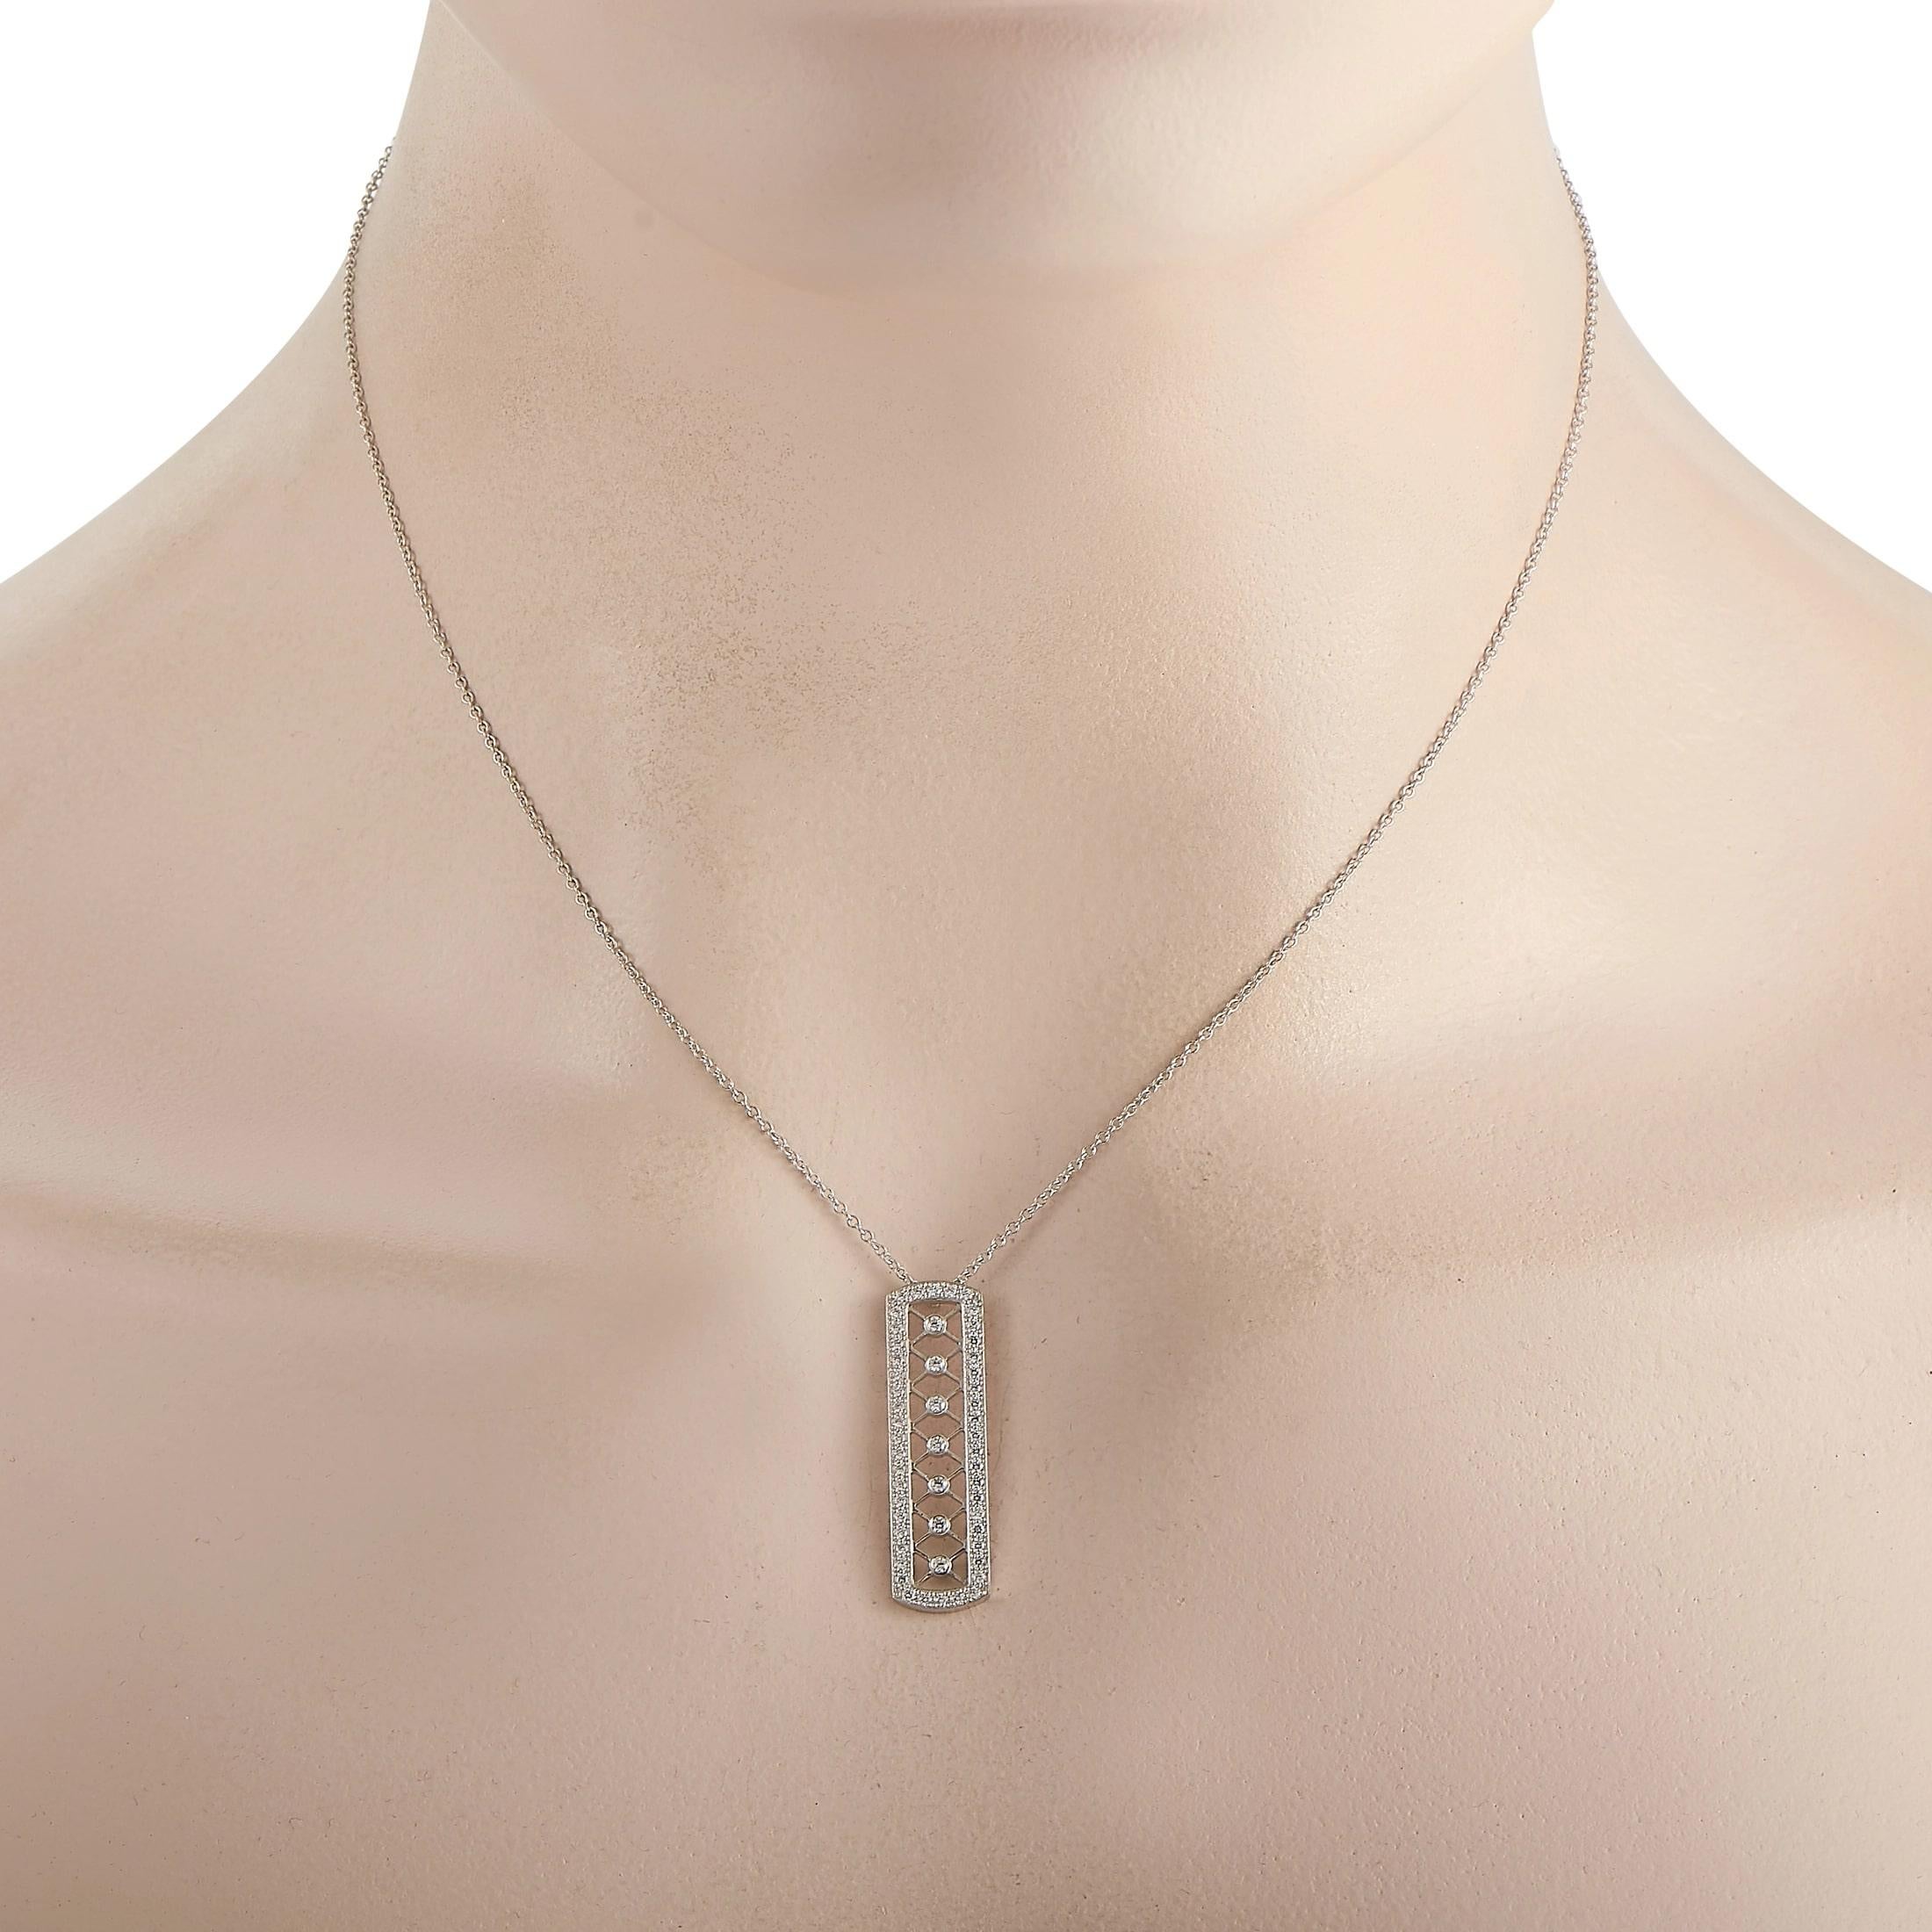 This diamond pendant necklace from Tiffany & Co. is decidedly delicate. On the elegant pendant - which measures 1.15” long and .31” wide - you’ll find an intricate Platinum lattice-shaped design that is accented by 0.40 carats of glittering